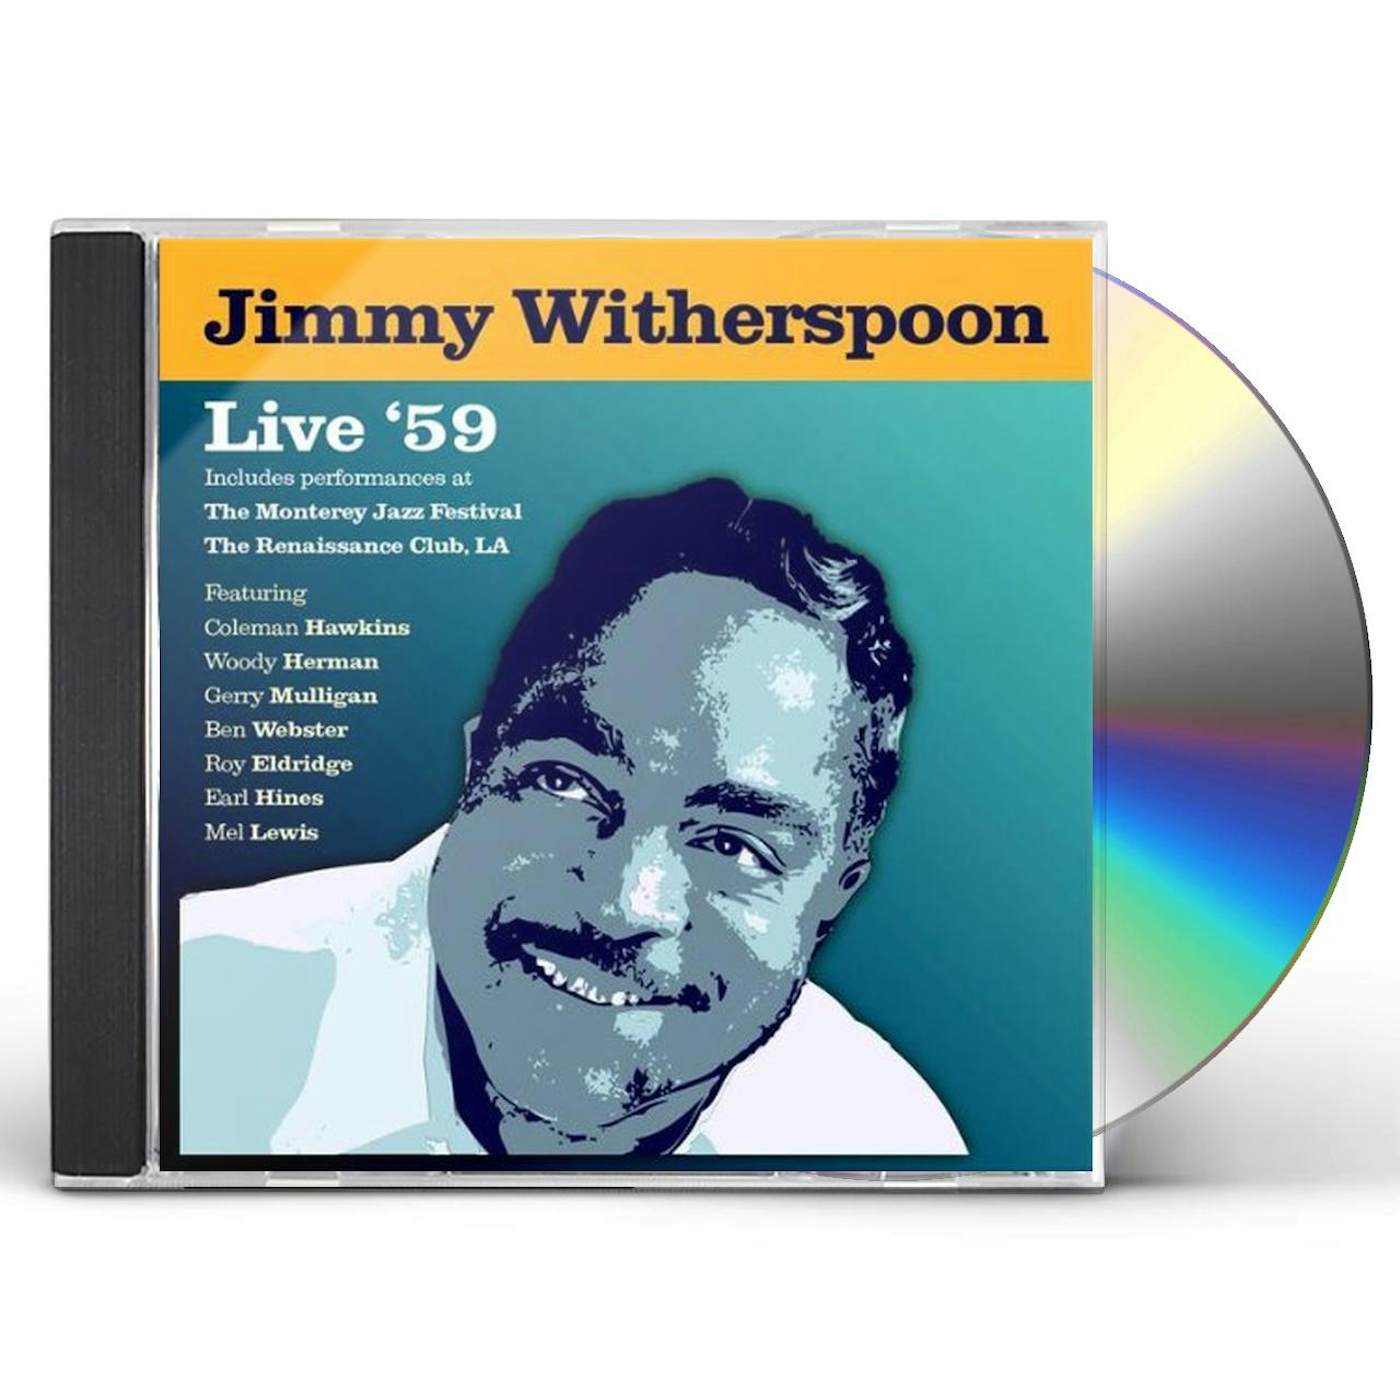 Jimmy Witherspoon LIVE 59 (OCRD) CD